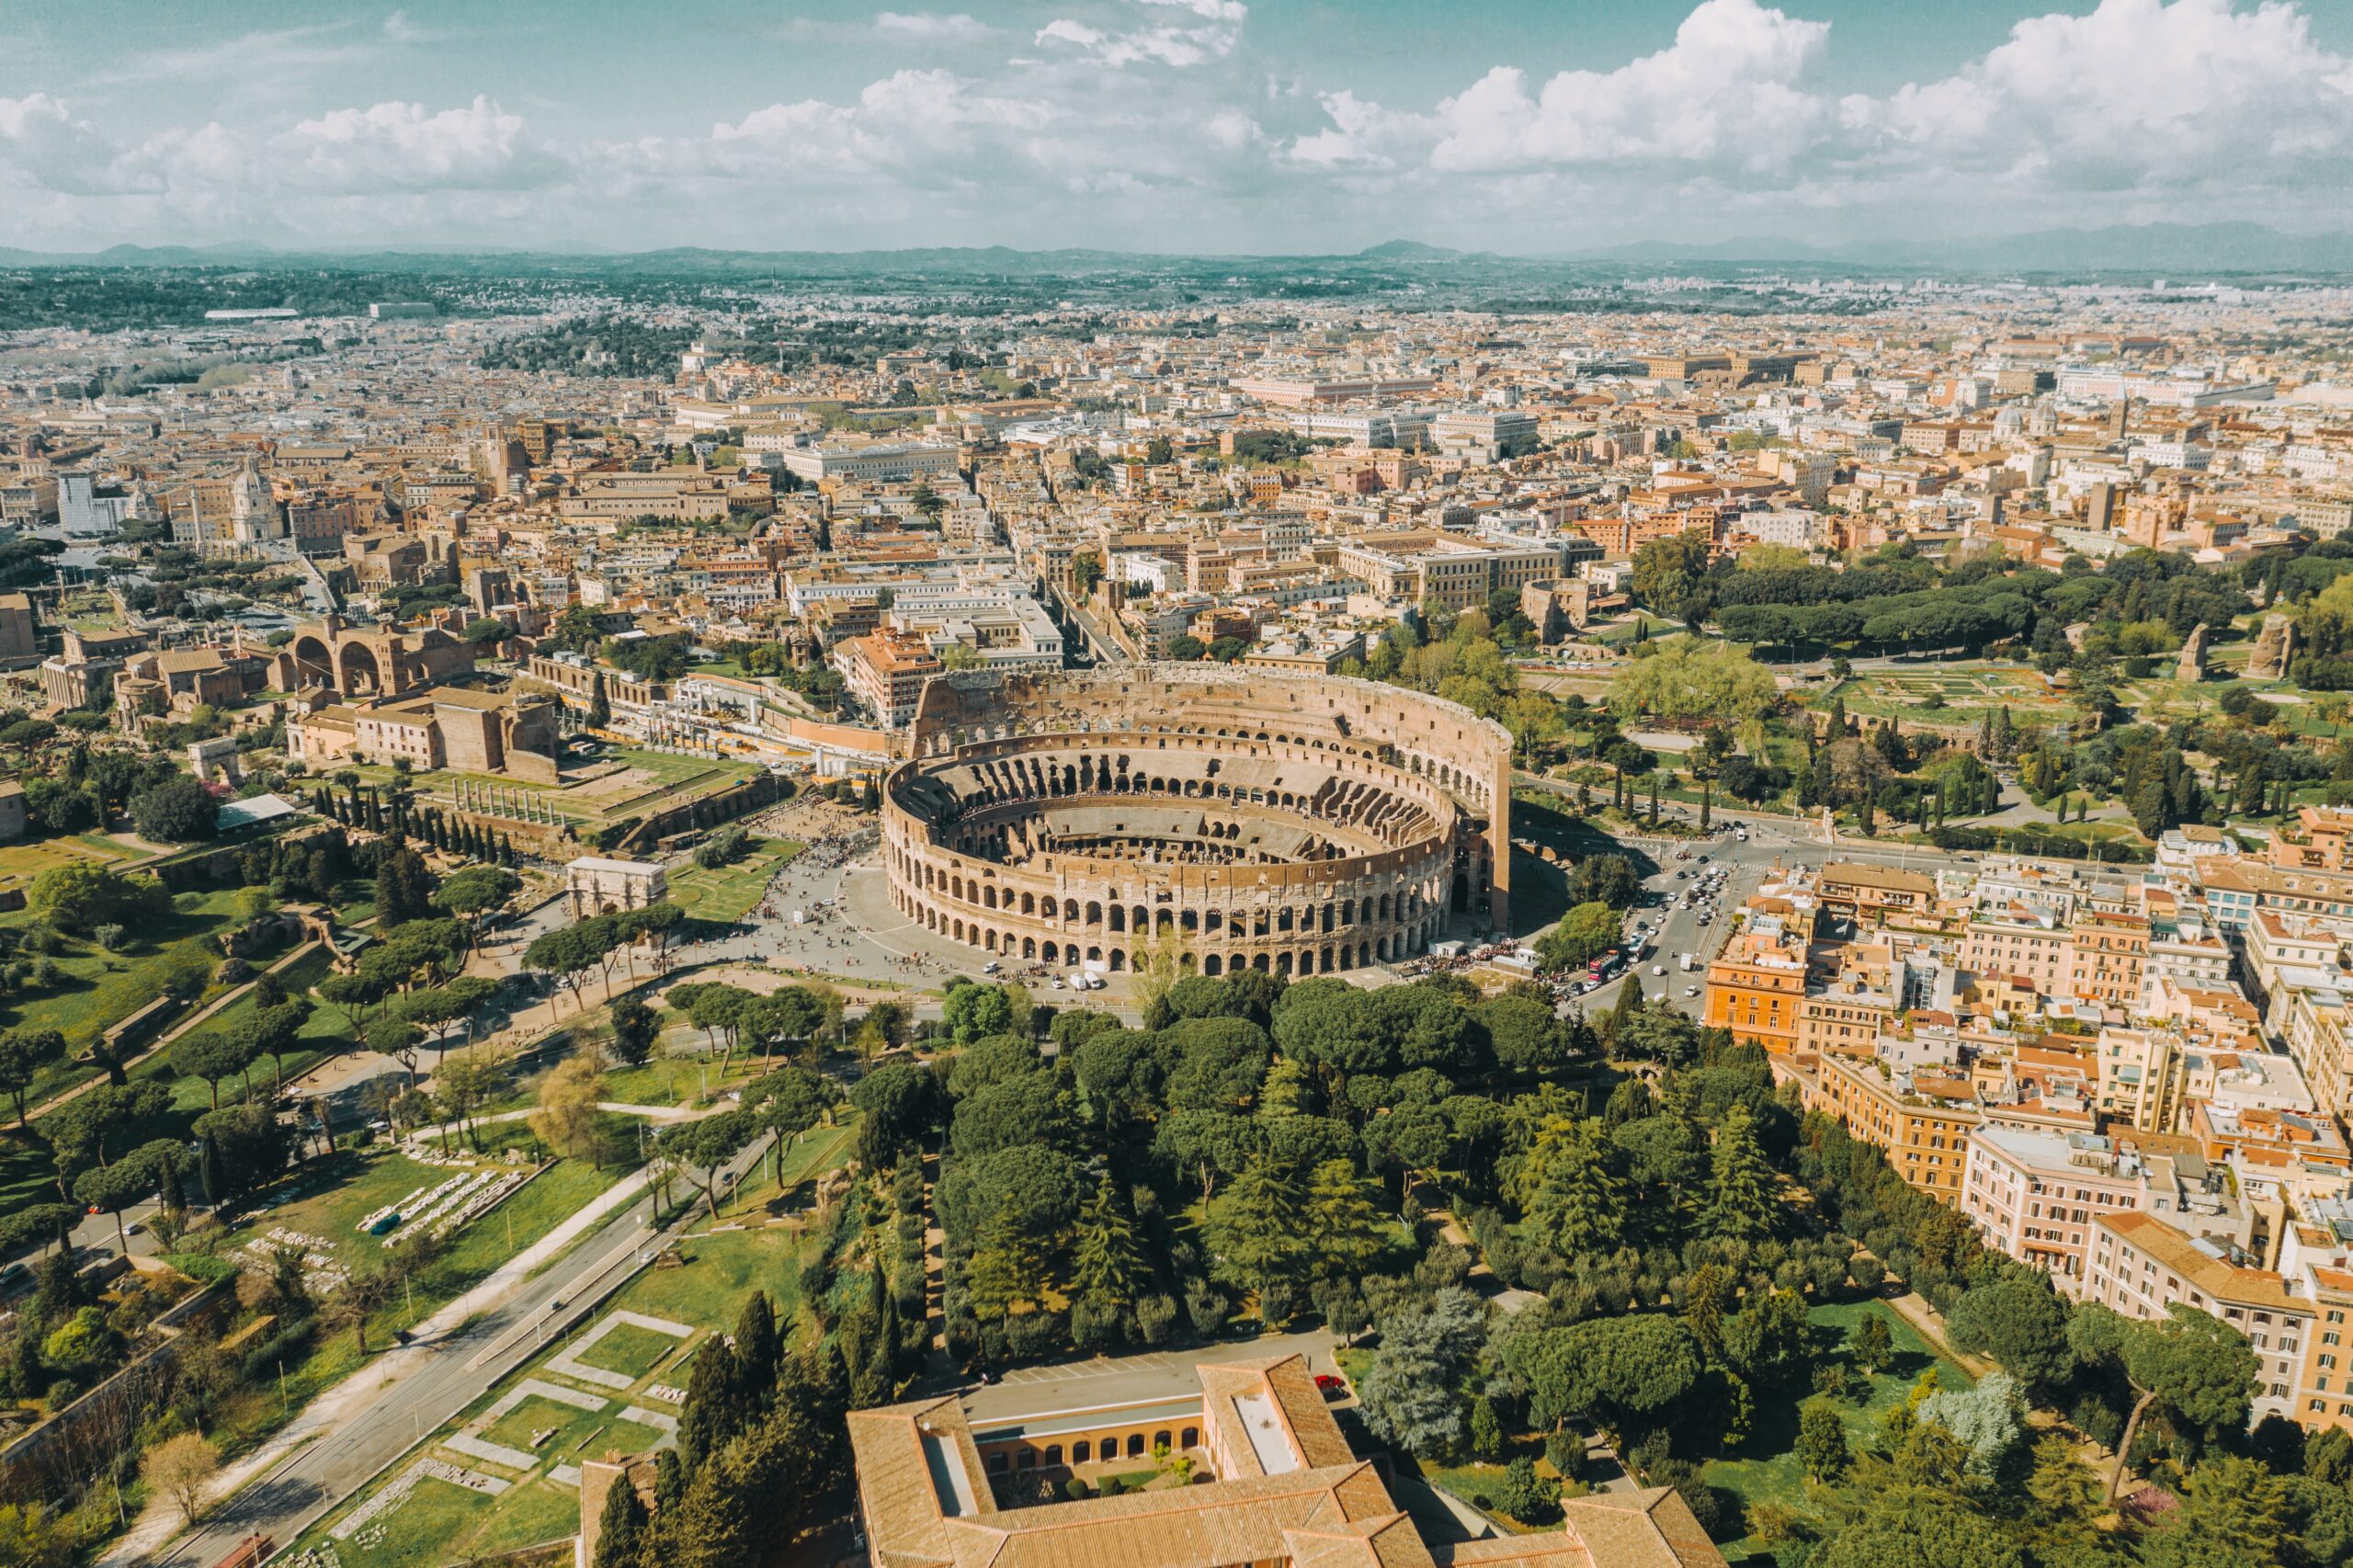 48 HOURS IN ROME